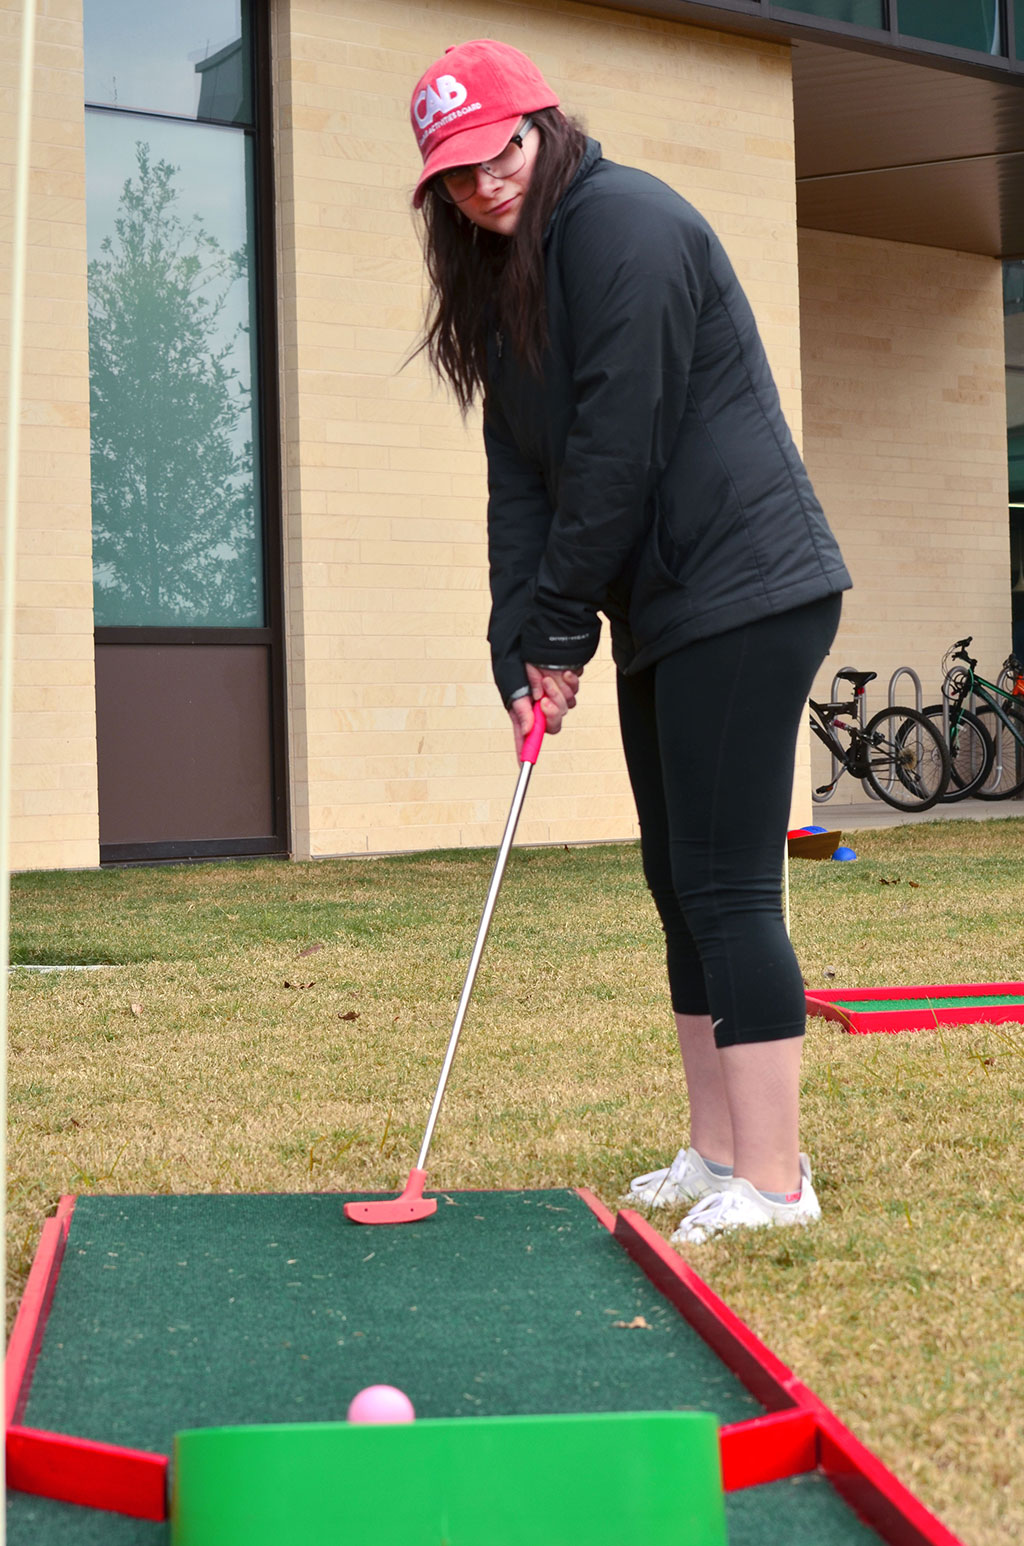 PHOTO: Leslie Chapa, a member of the Campus Activities Board, makes the winning shot on a particularly trying hole of the putt-putt golf course set up during the Jan. 30, 2019 Winter Wonderland celebration on the UHCL campus between the new STEM building and rec center. Photo by The Signal reporter Jennifer Martinez.